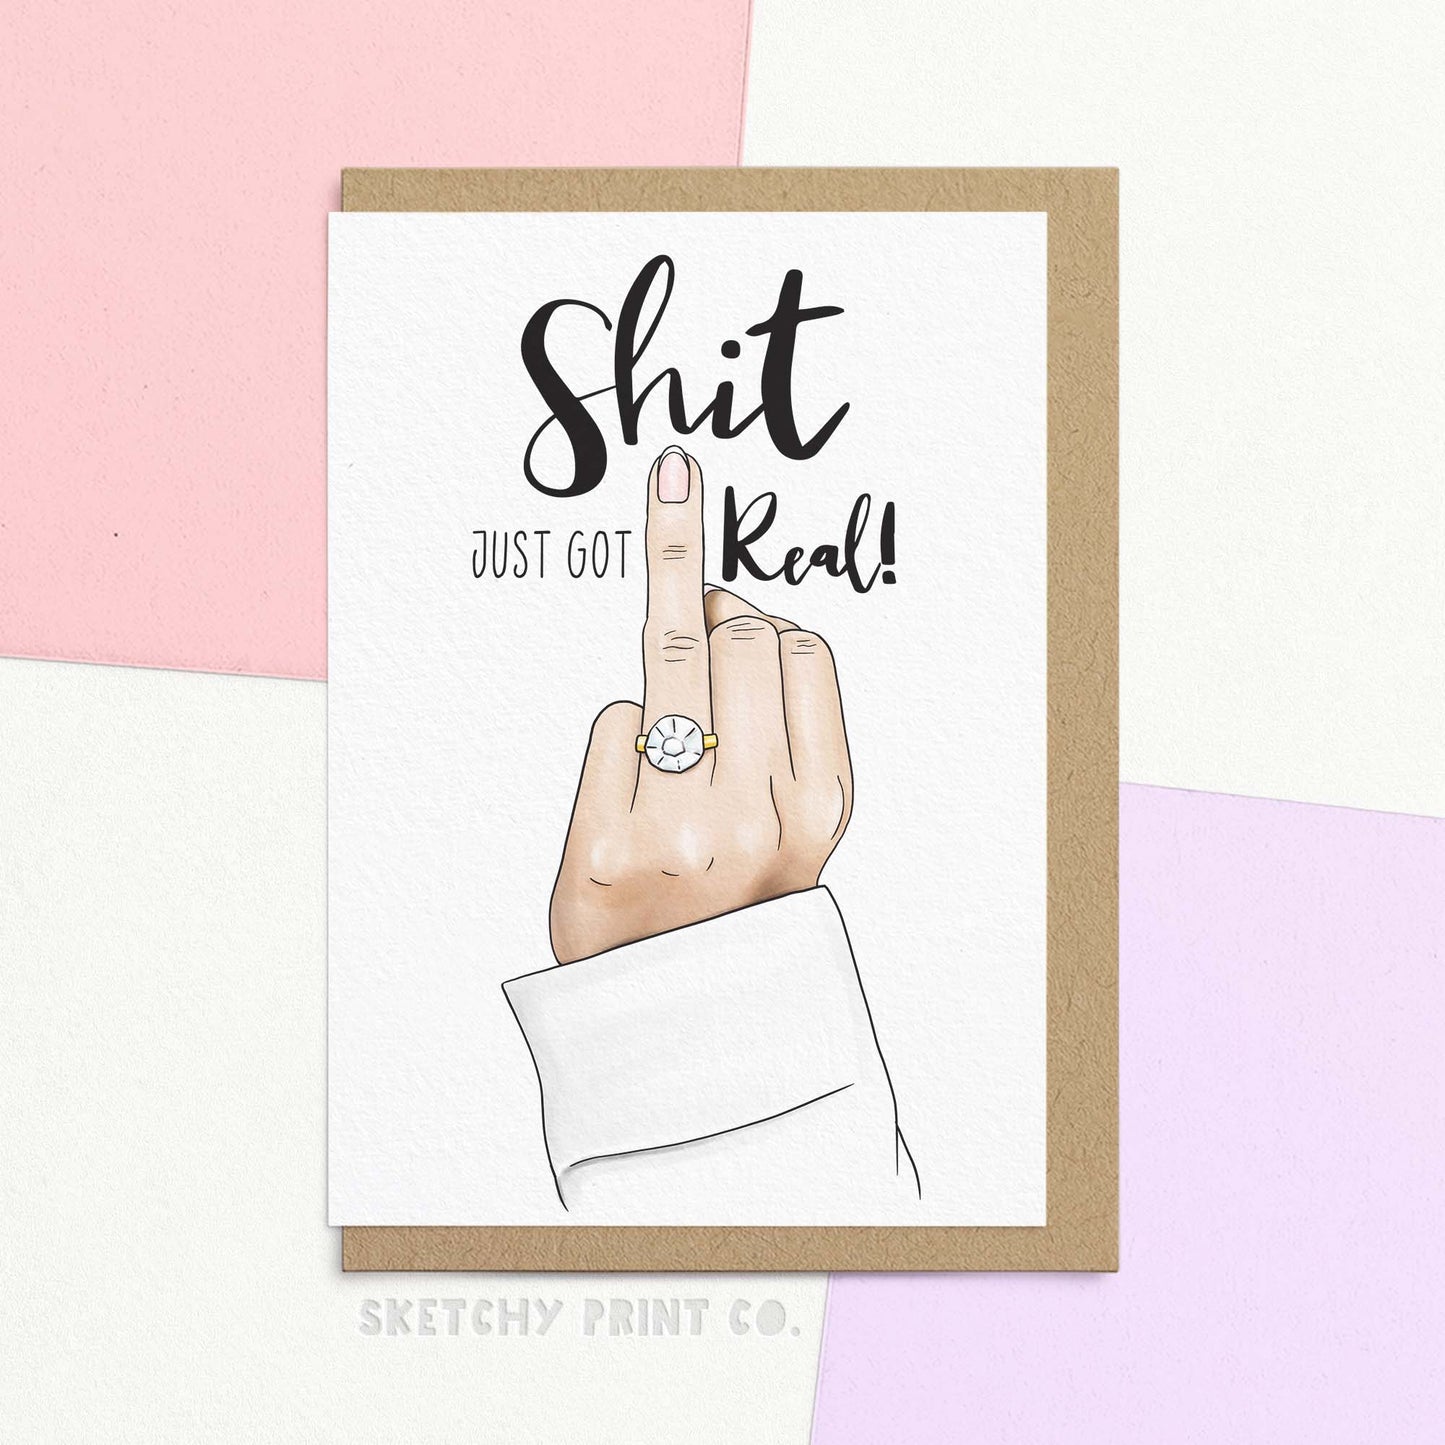 funny wedding wishes or congratulations on your engagement card. Modern wedding greeting for friend. Funny wedding card messages, Funny wedding and engagement card reading 'This just got real!' featuring a white hand holding up the ring finger showing off a sparkly engagement ring.